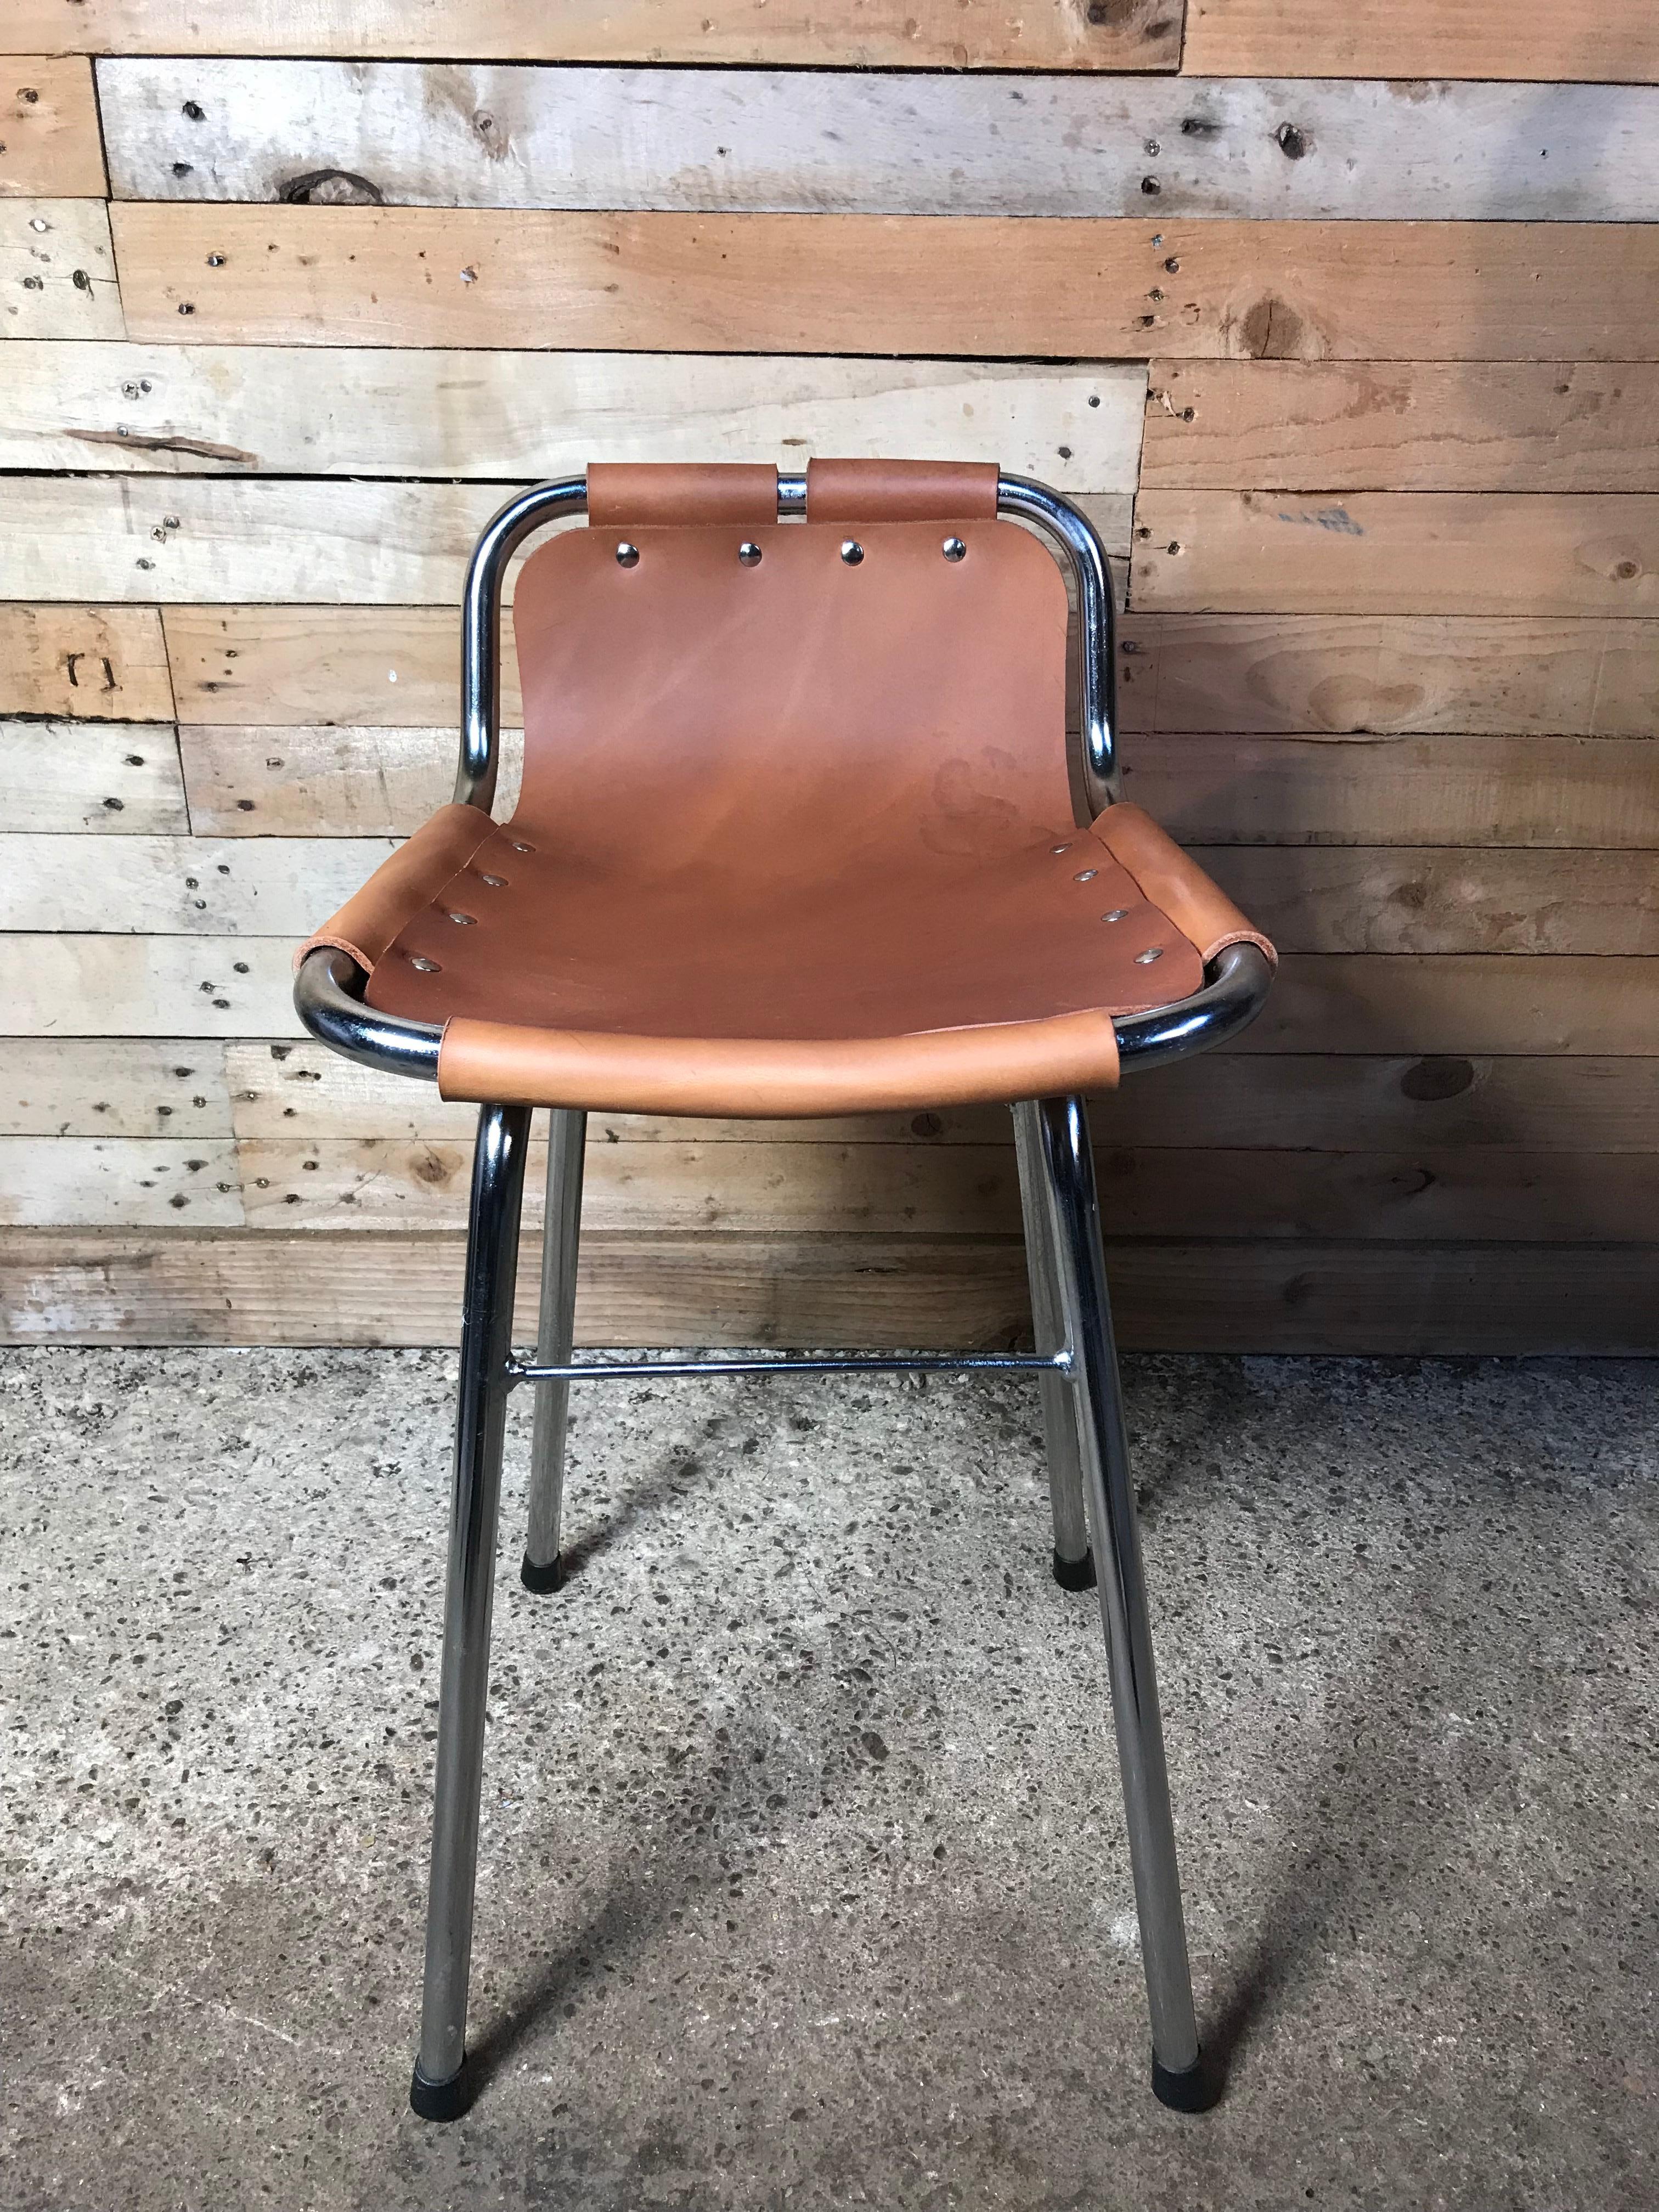 Designed by Charlotte Perriand for and used in the Ski Resort Les Arcs, circa 1960. These chairs were commissioned to be made by Cassina, one of the best Italian furniture makers and the only manufacturer of this authentic Charlotte Perriand stool.